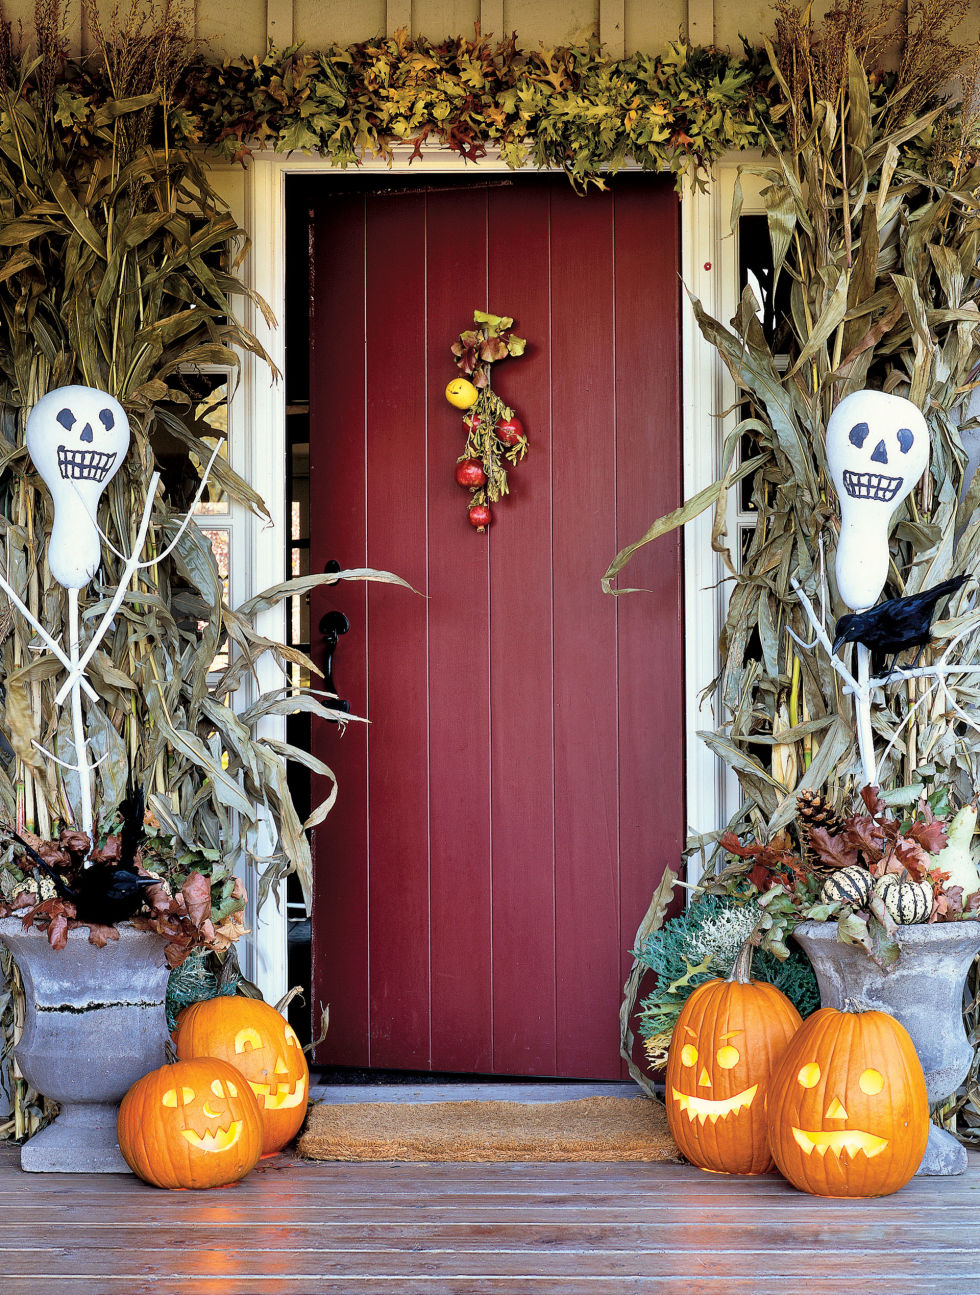 Cool Ideas Of Halloween Decorations